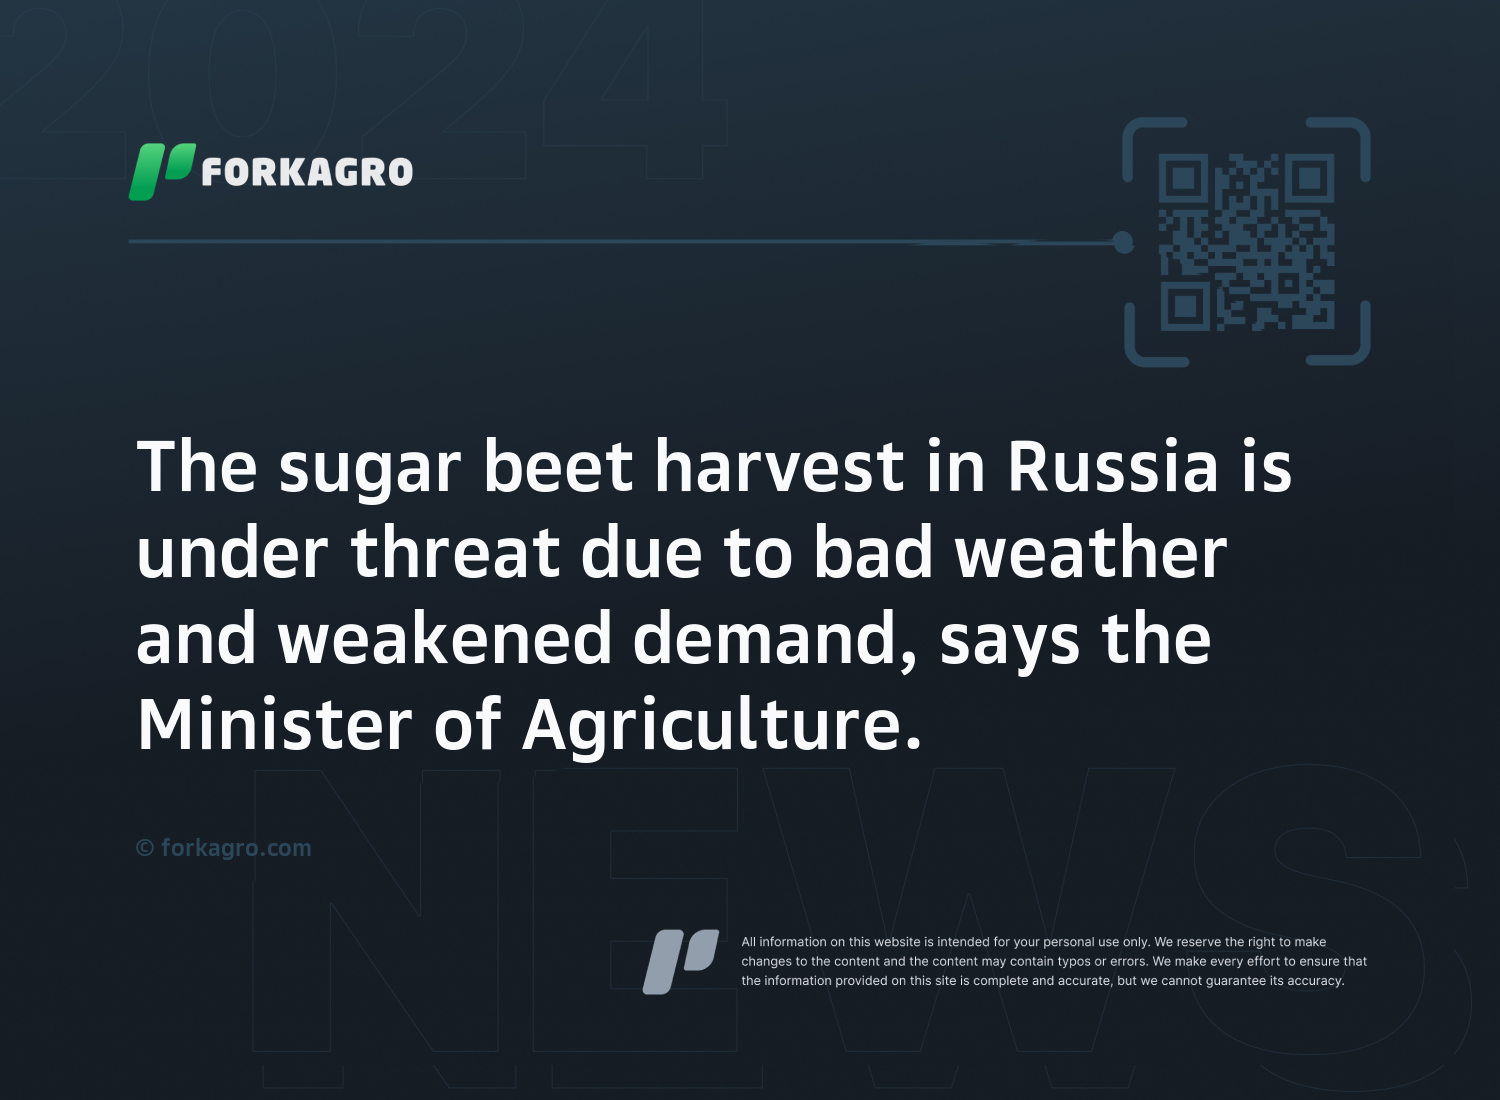 The sugar beet harvest in Russia is under threat due to bad weather and weakened demand, says the Minister of Agriculture.